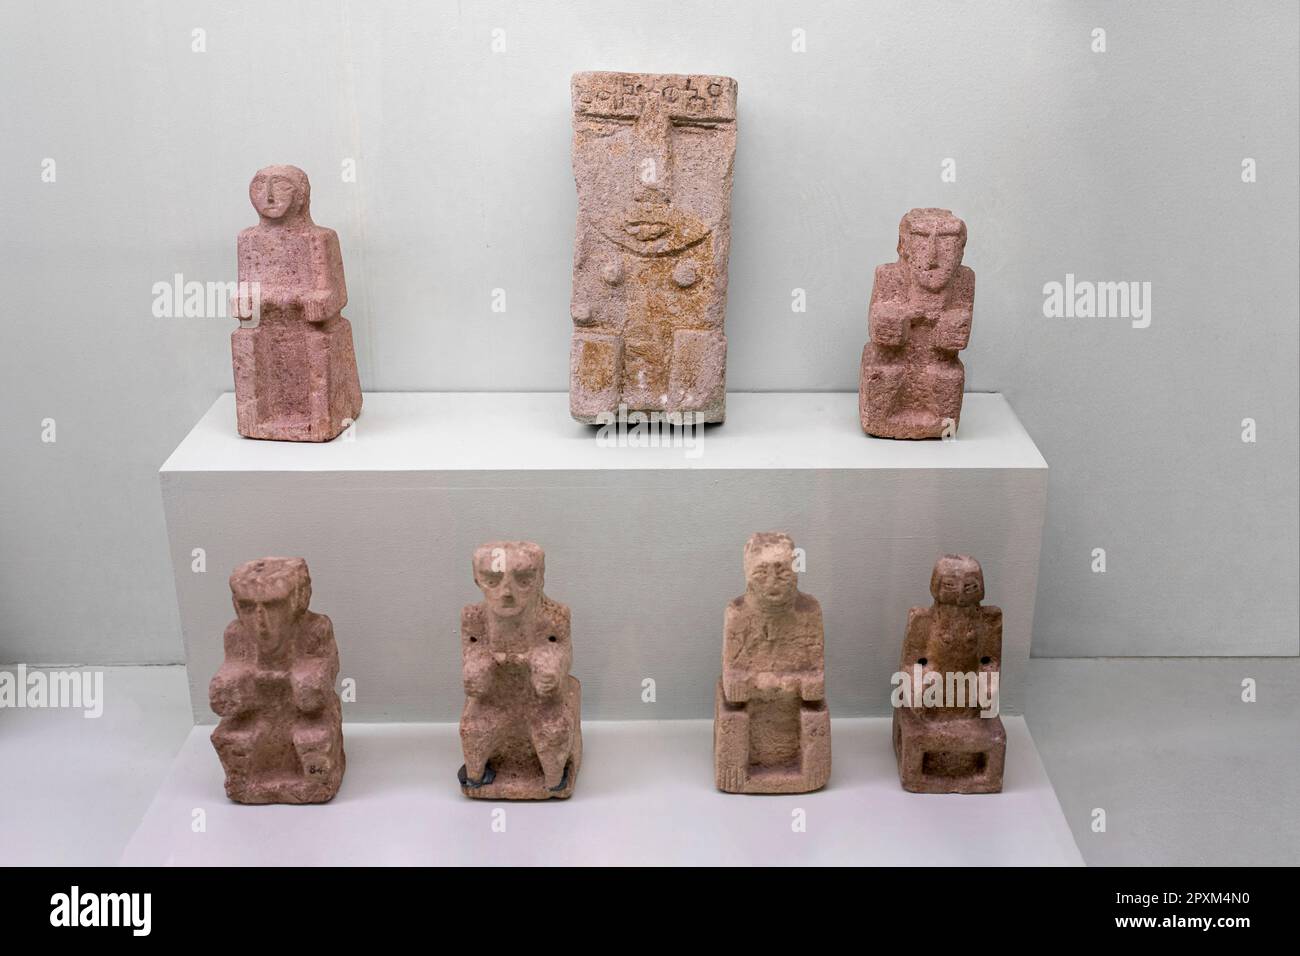 Votive human figure statuettes from the Arabian Peninsula, 4th to 1st century BCE. Ancient Orient Museum, Istanbul. Stock Photo